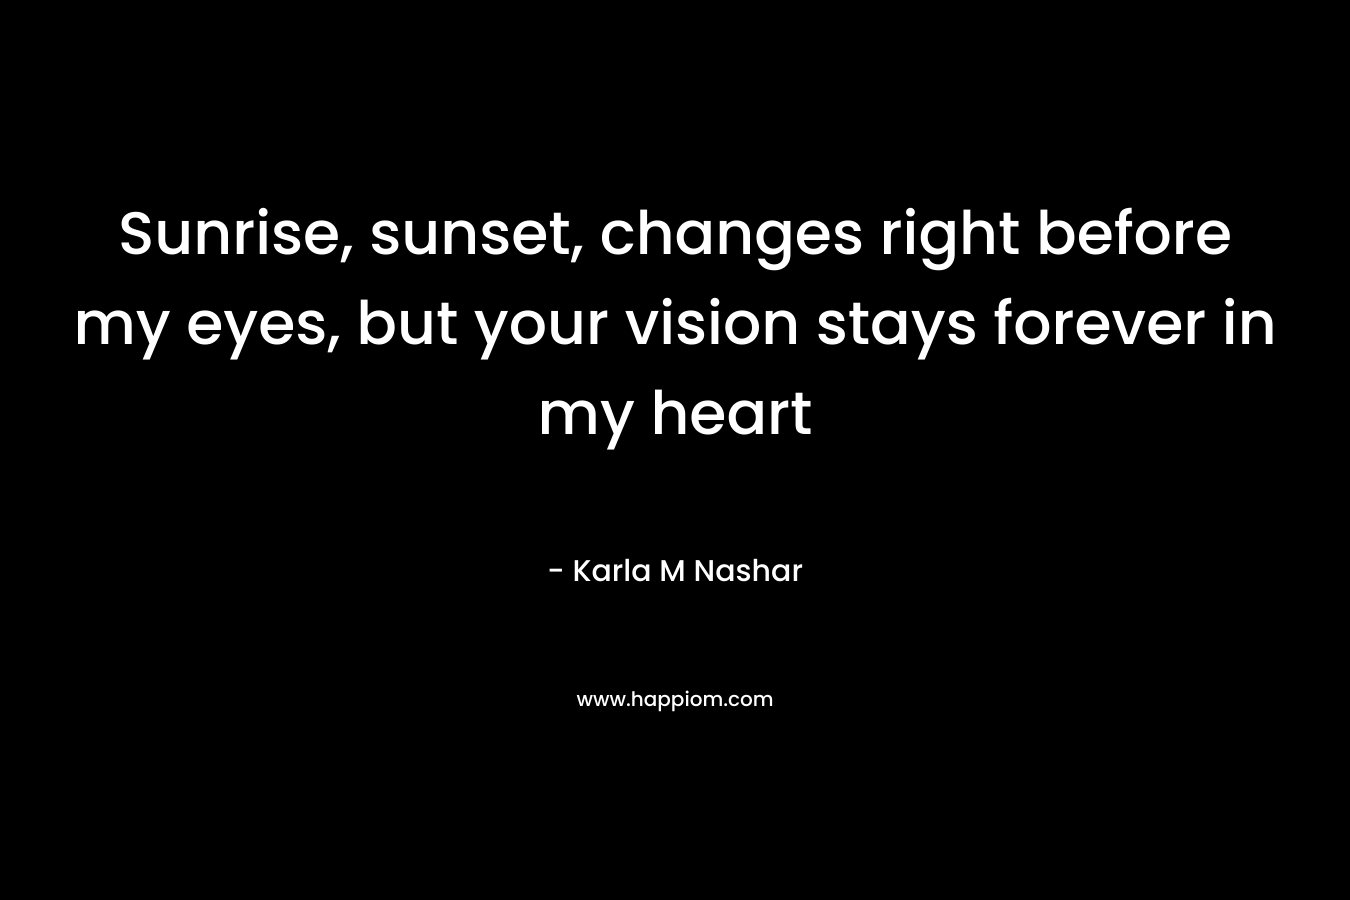 Sunrise, sunset, changes right before my eyes, but your vision stays forever in my heart – Karla M Nashar